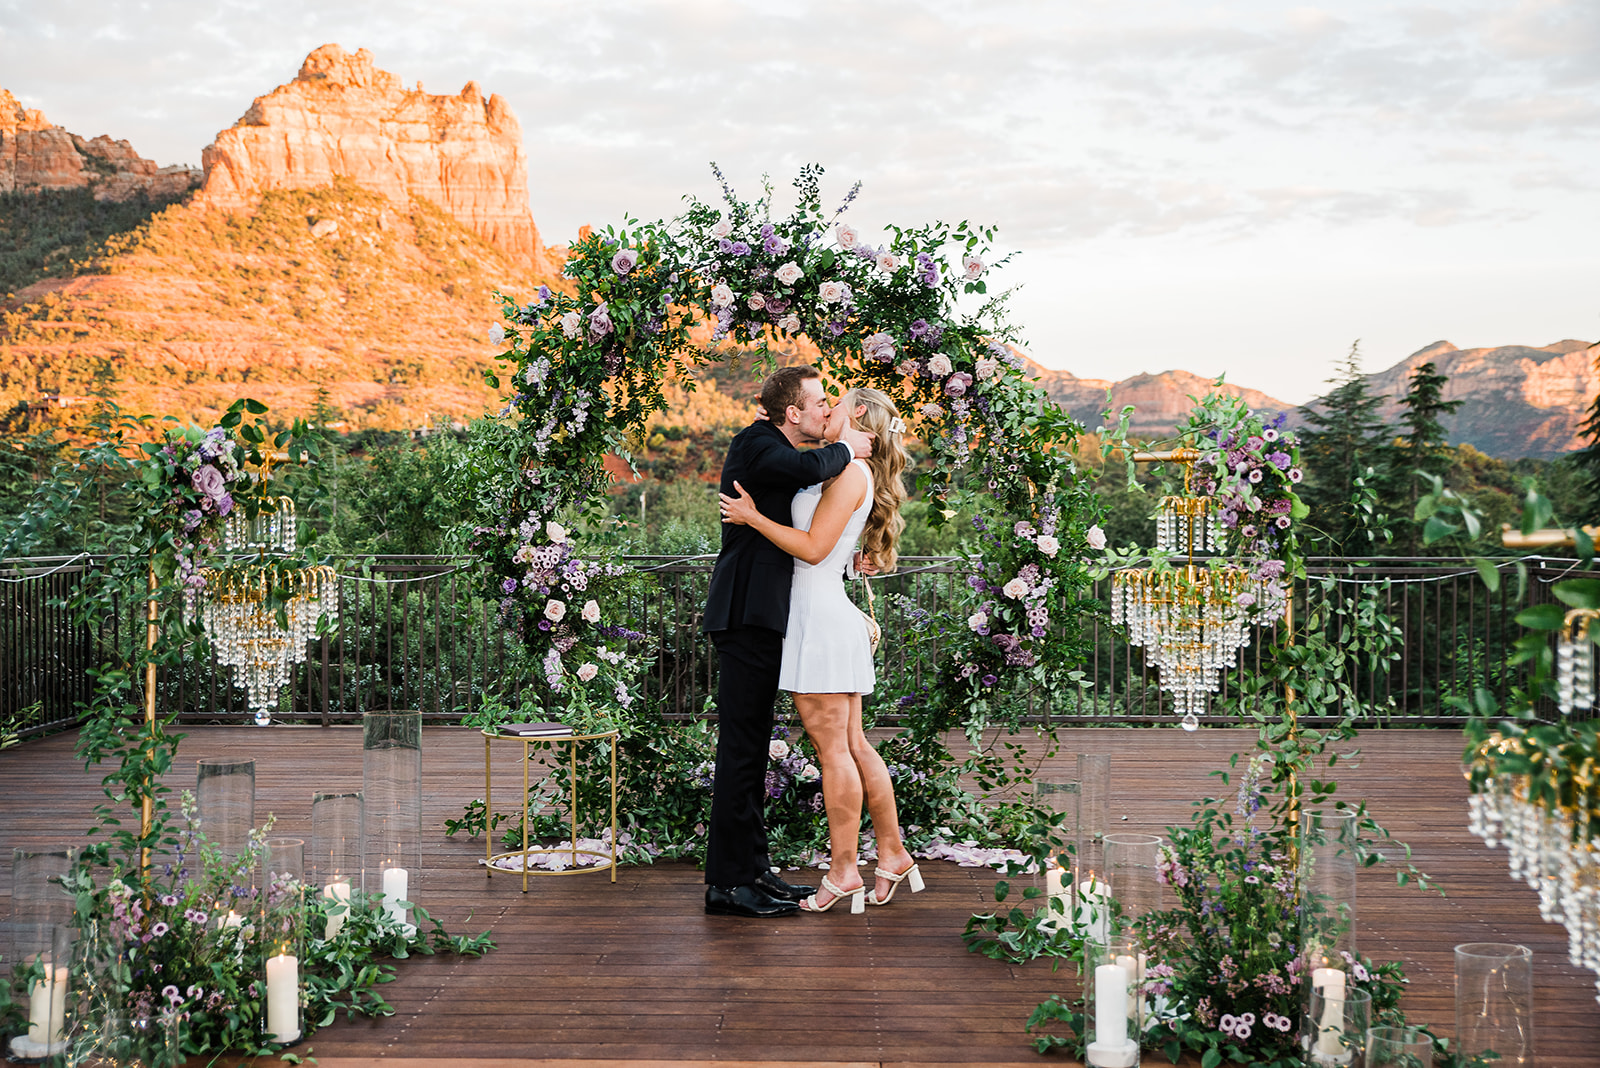 A newly engaged couple kisses while standing on a mountain overlook boardwalk in Sedona surrounded by romantic decorations